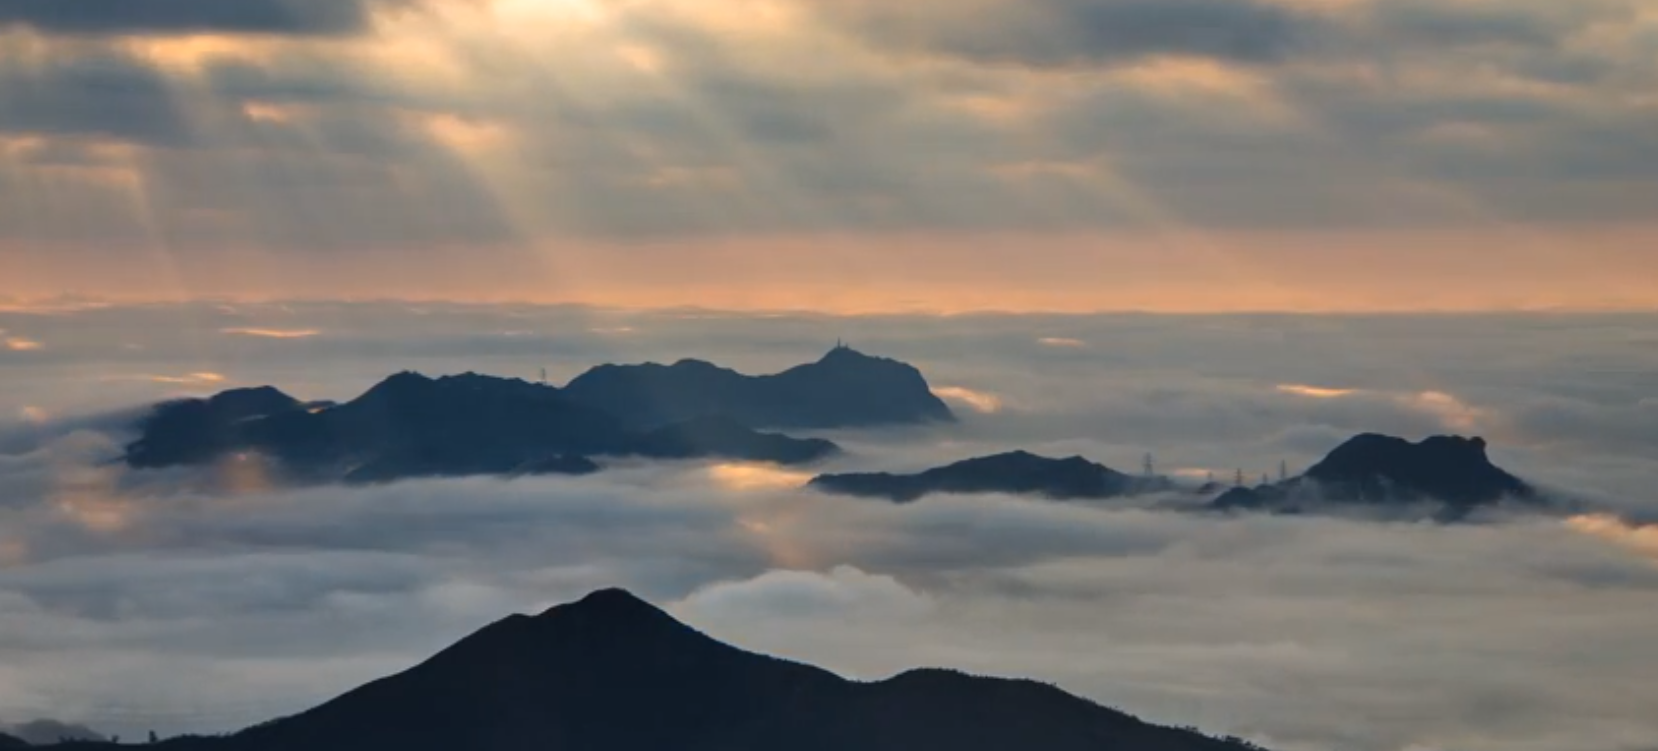 WATCH: Timelapse footage of natural Hong Kong